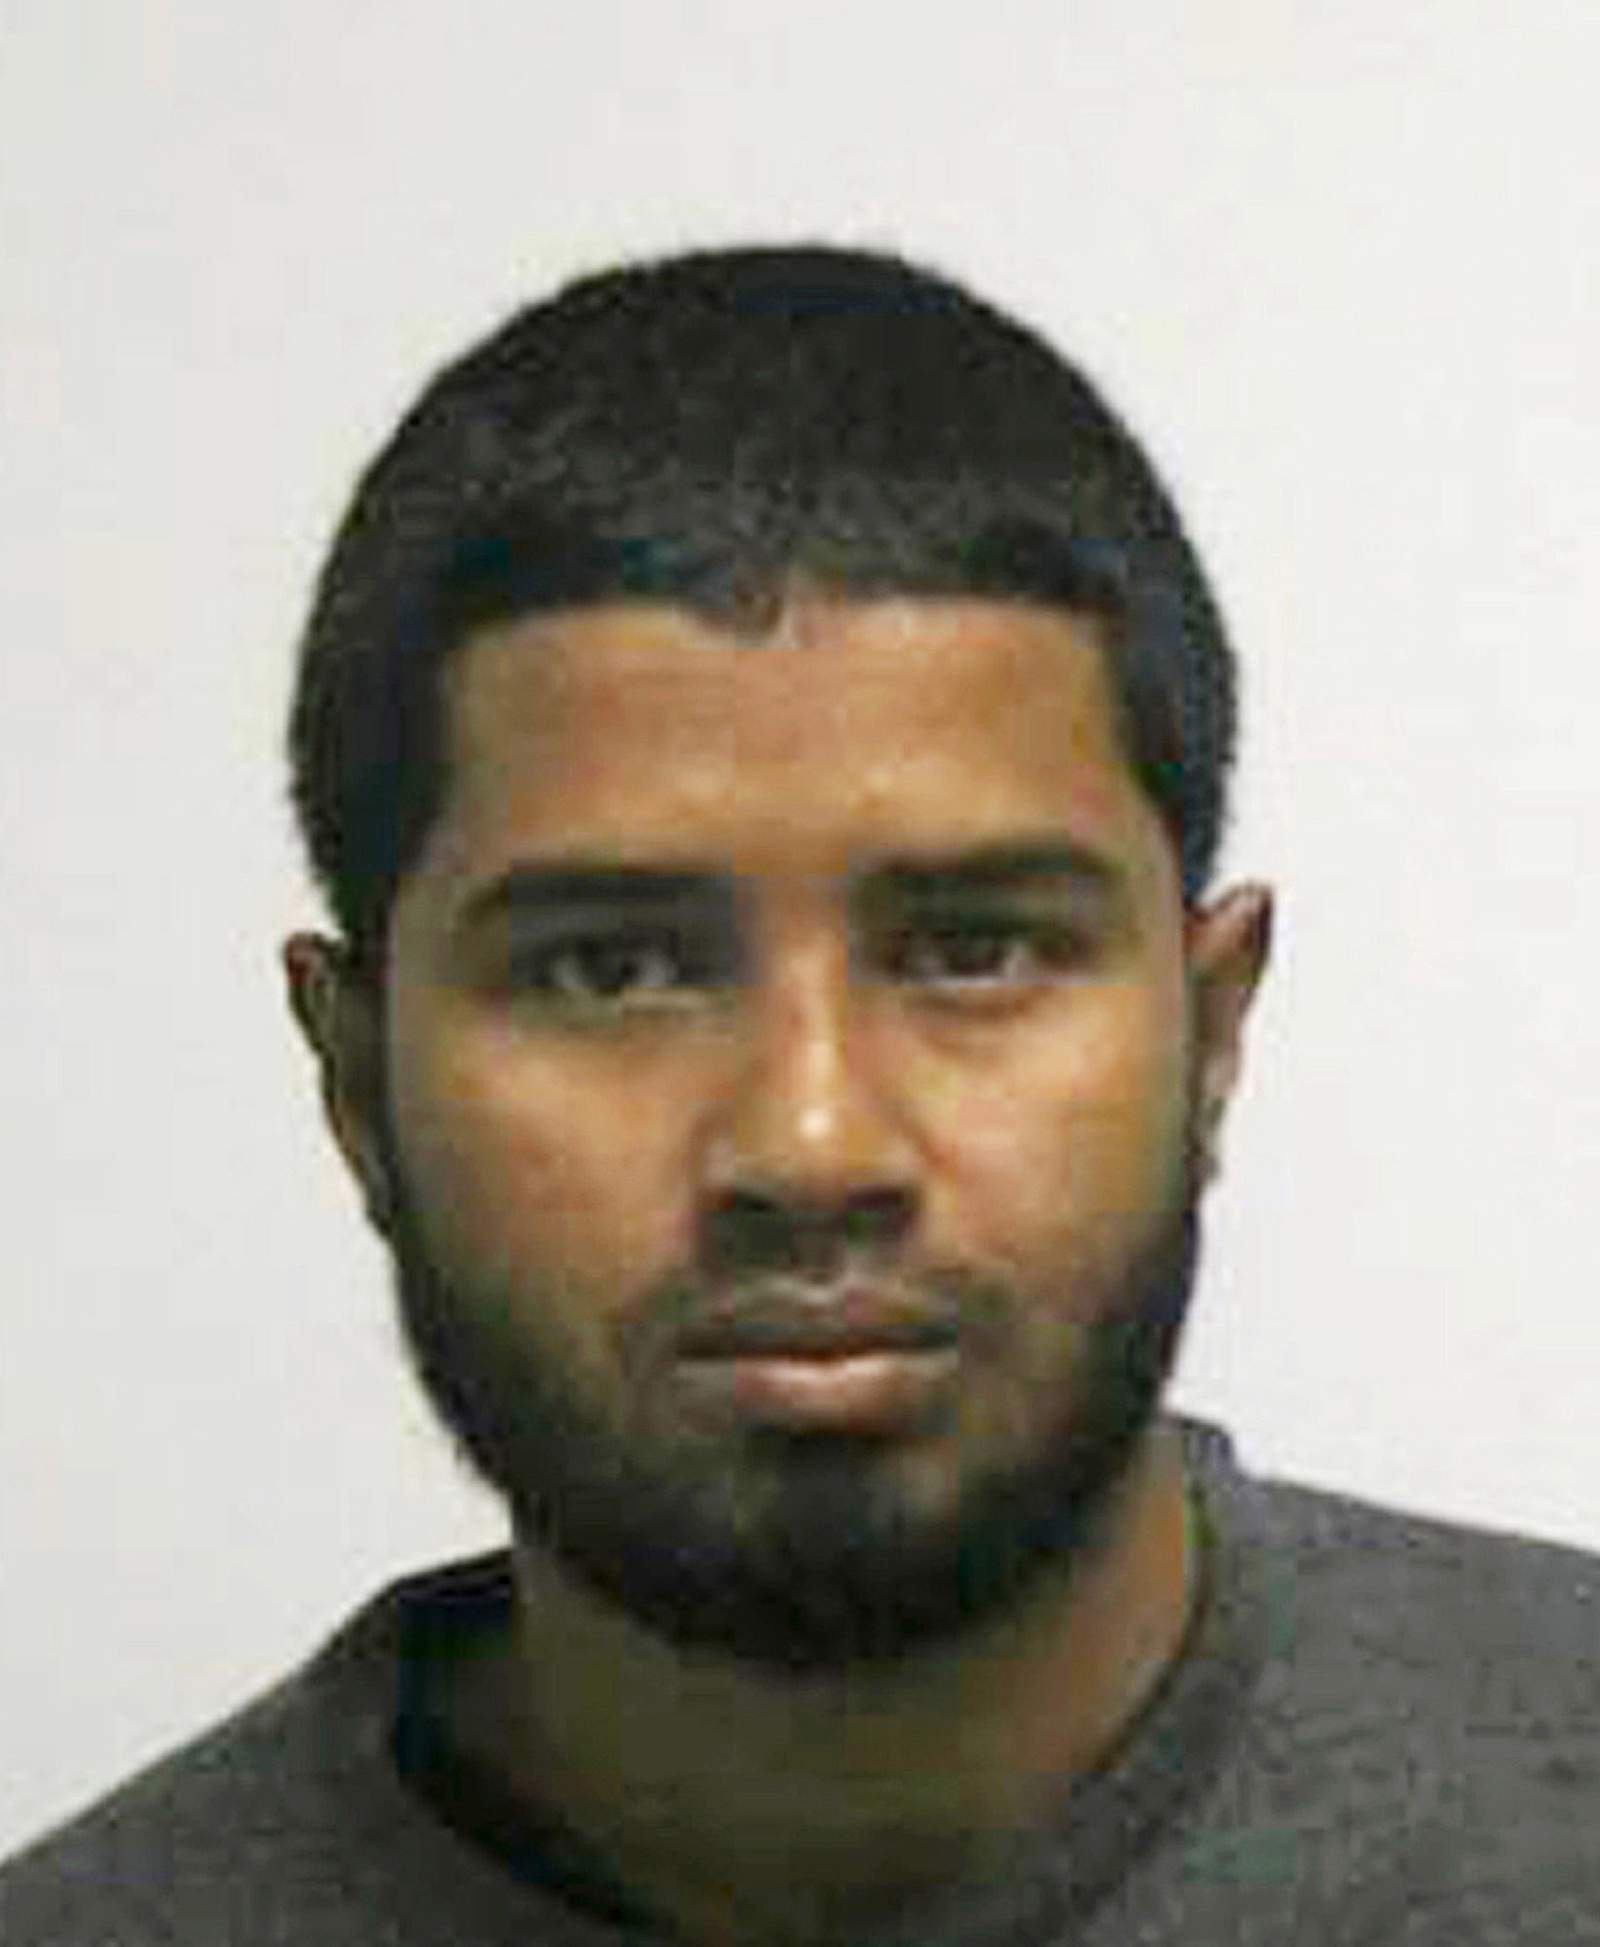 Prosecutors seek life term for would-be NYC suicide bomber